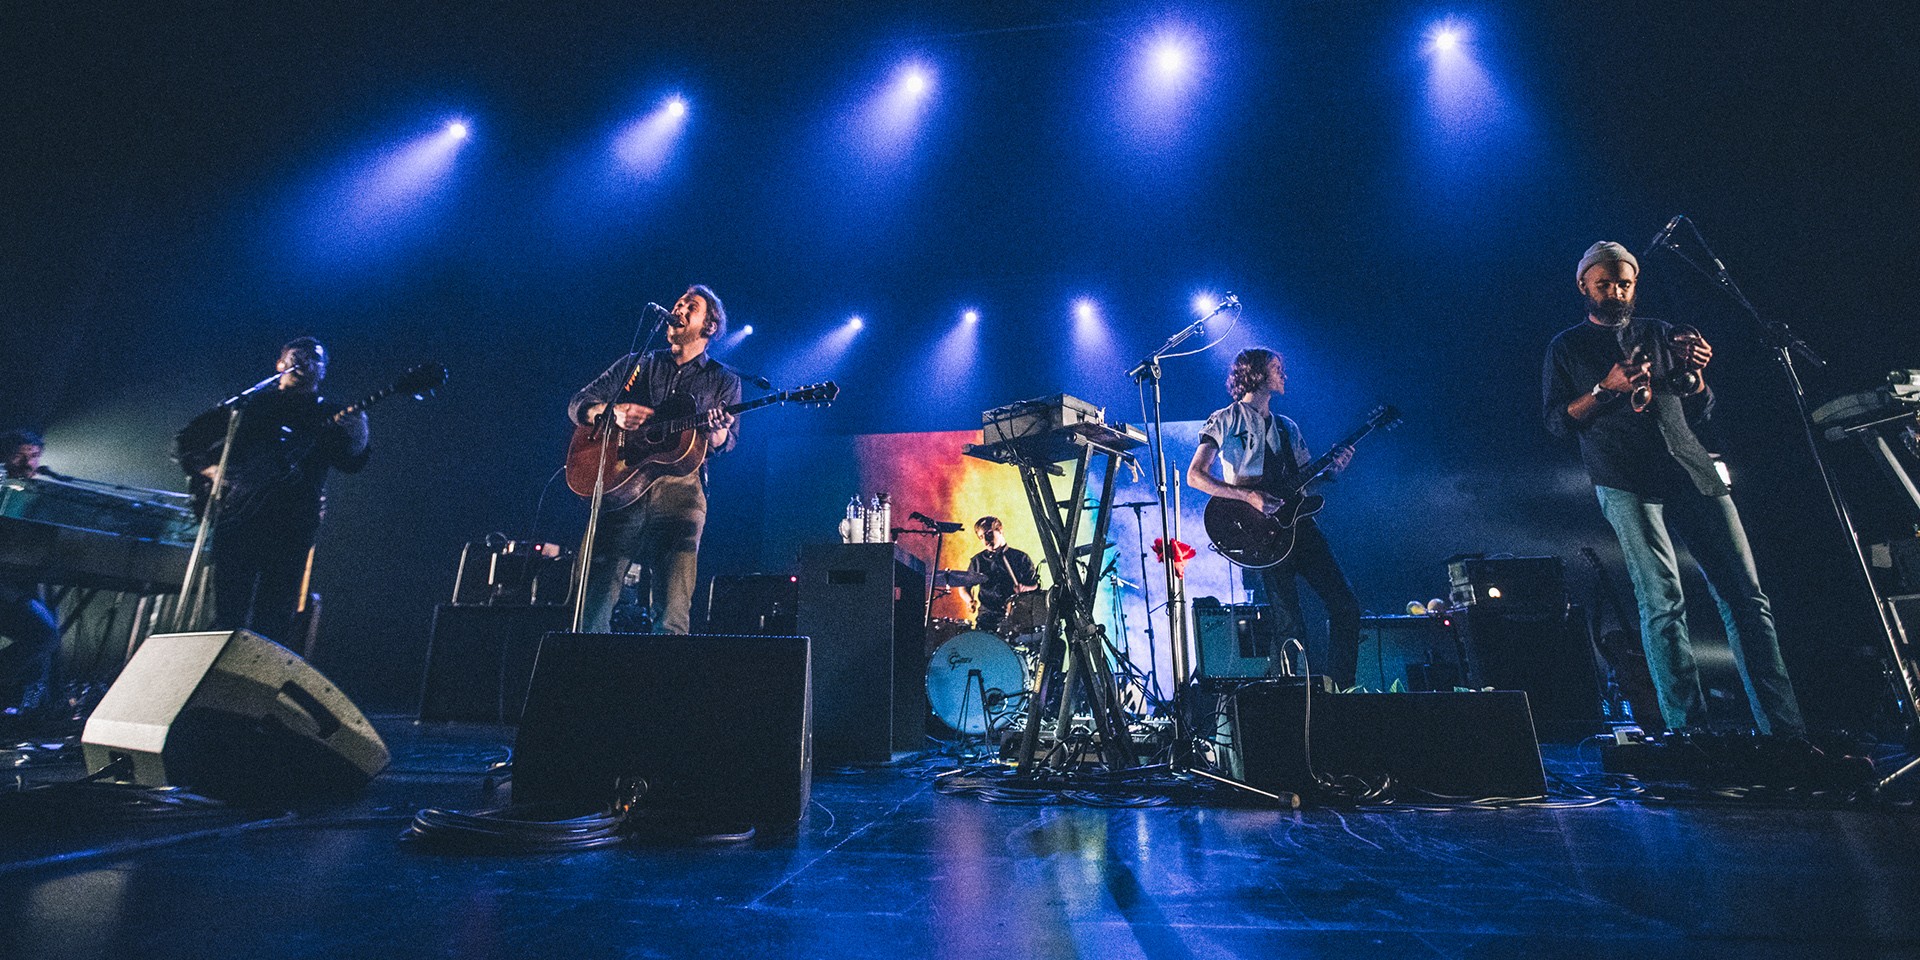 Fleet Foxes treat Singapore to a stately and stunning concert — gig report